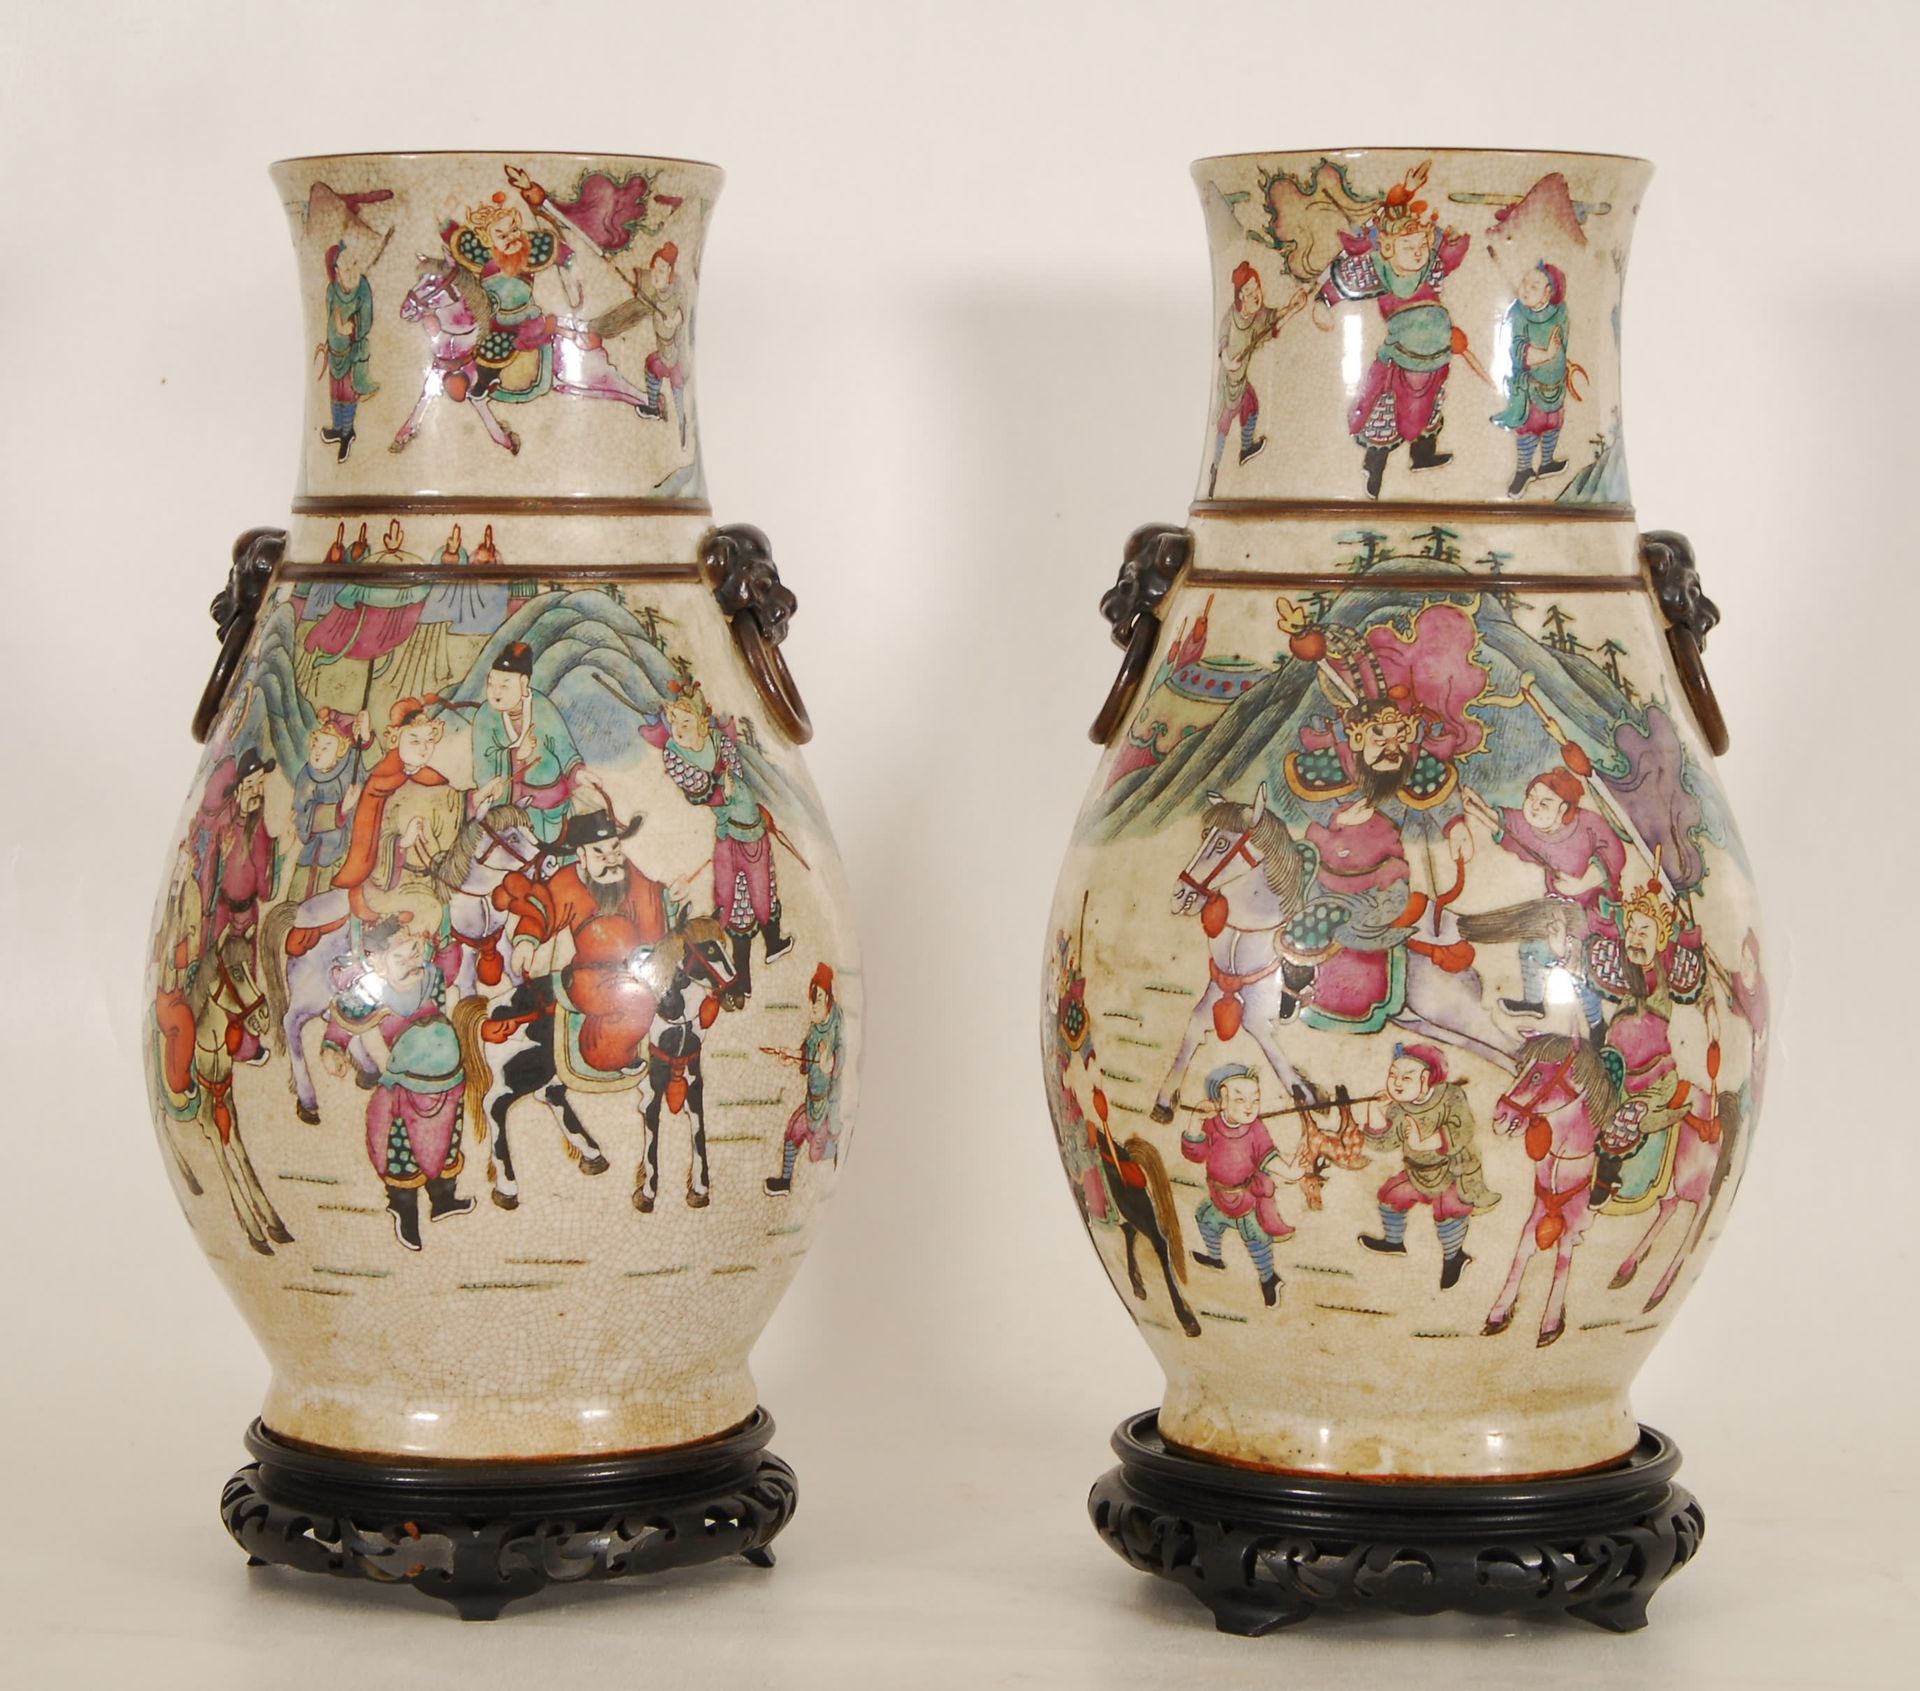 Null A pair of baluster vases with handles
China, Nankin, mark.
H. 40 cm.